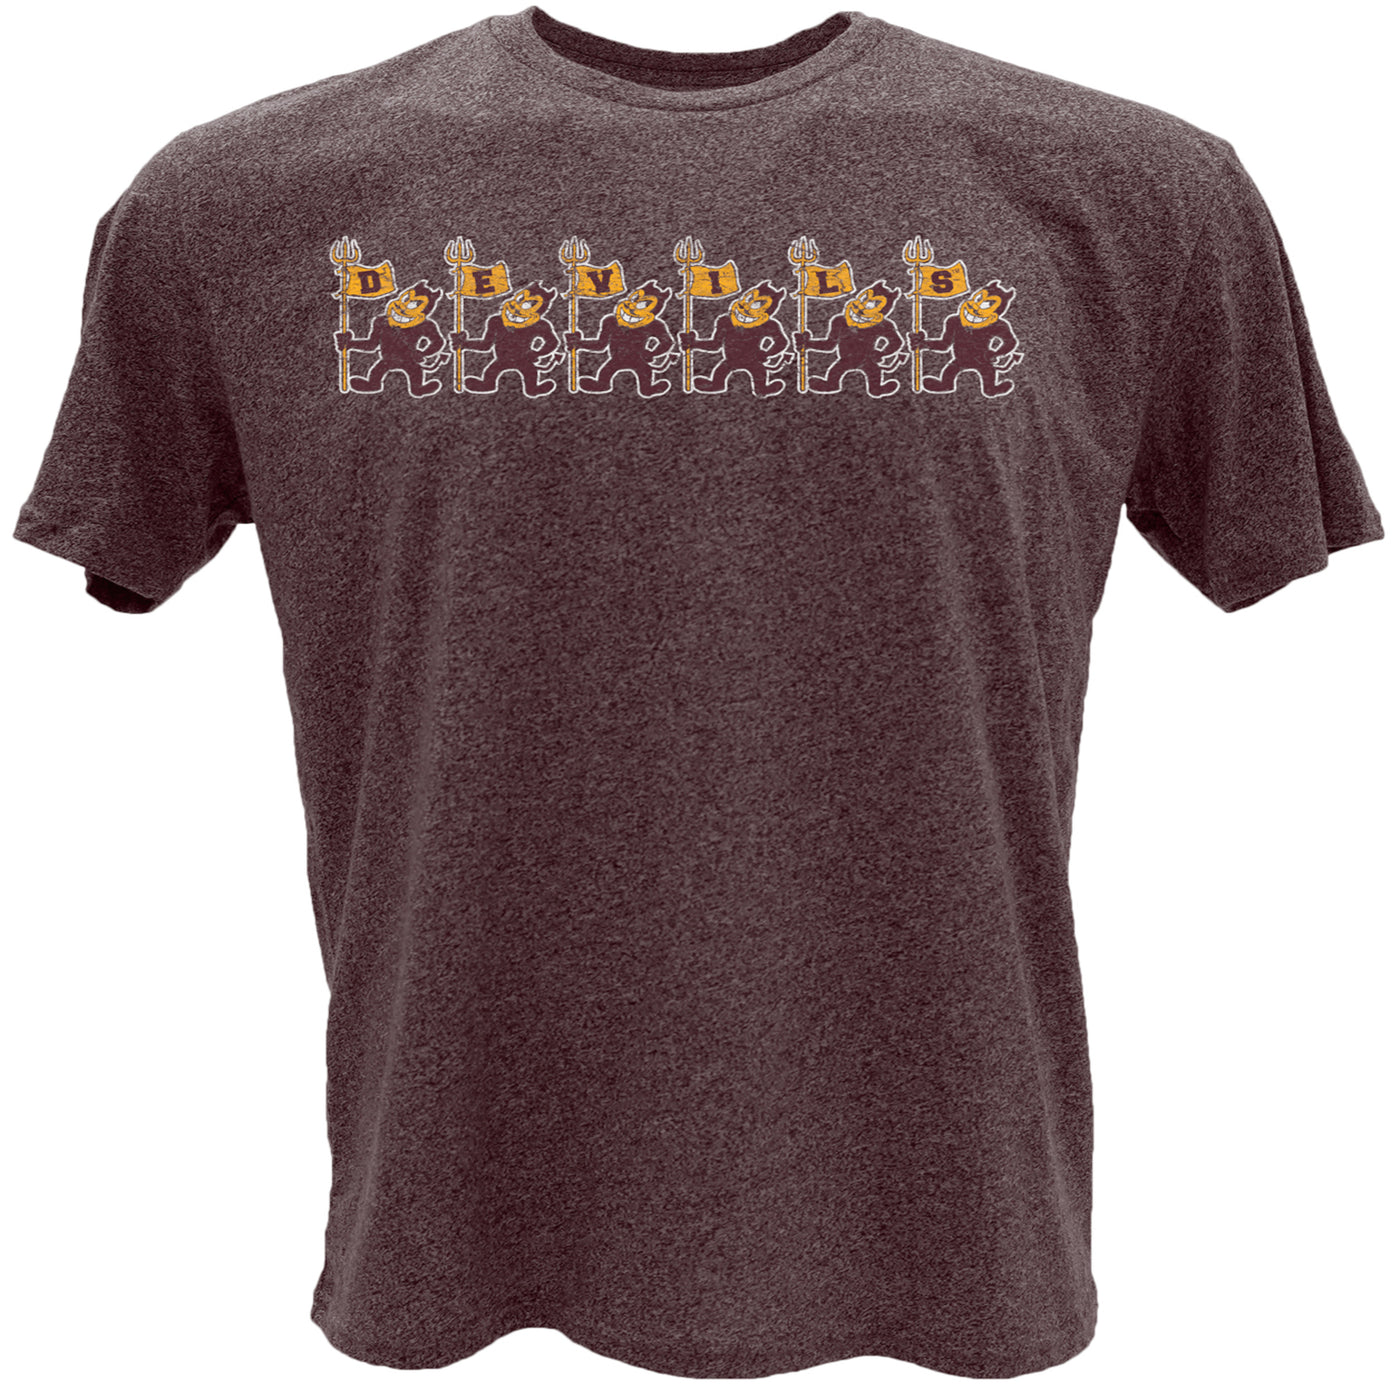 ASU maroon t shirt with a row of vintage sparky mascots that are each holding a flag with a letter that spells out 